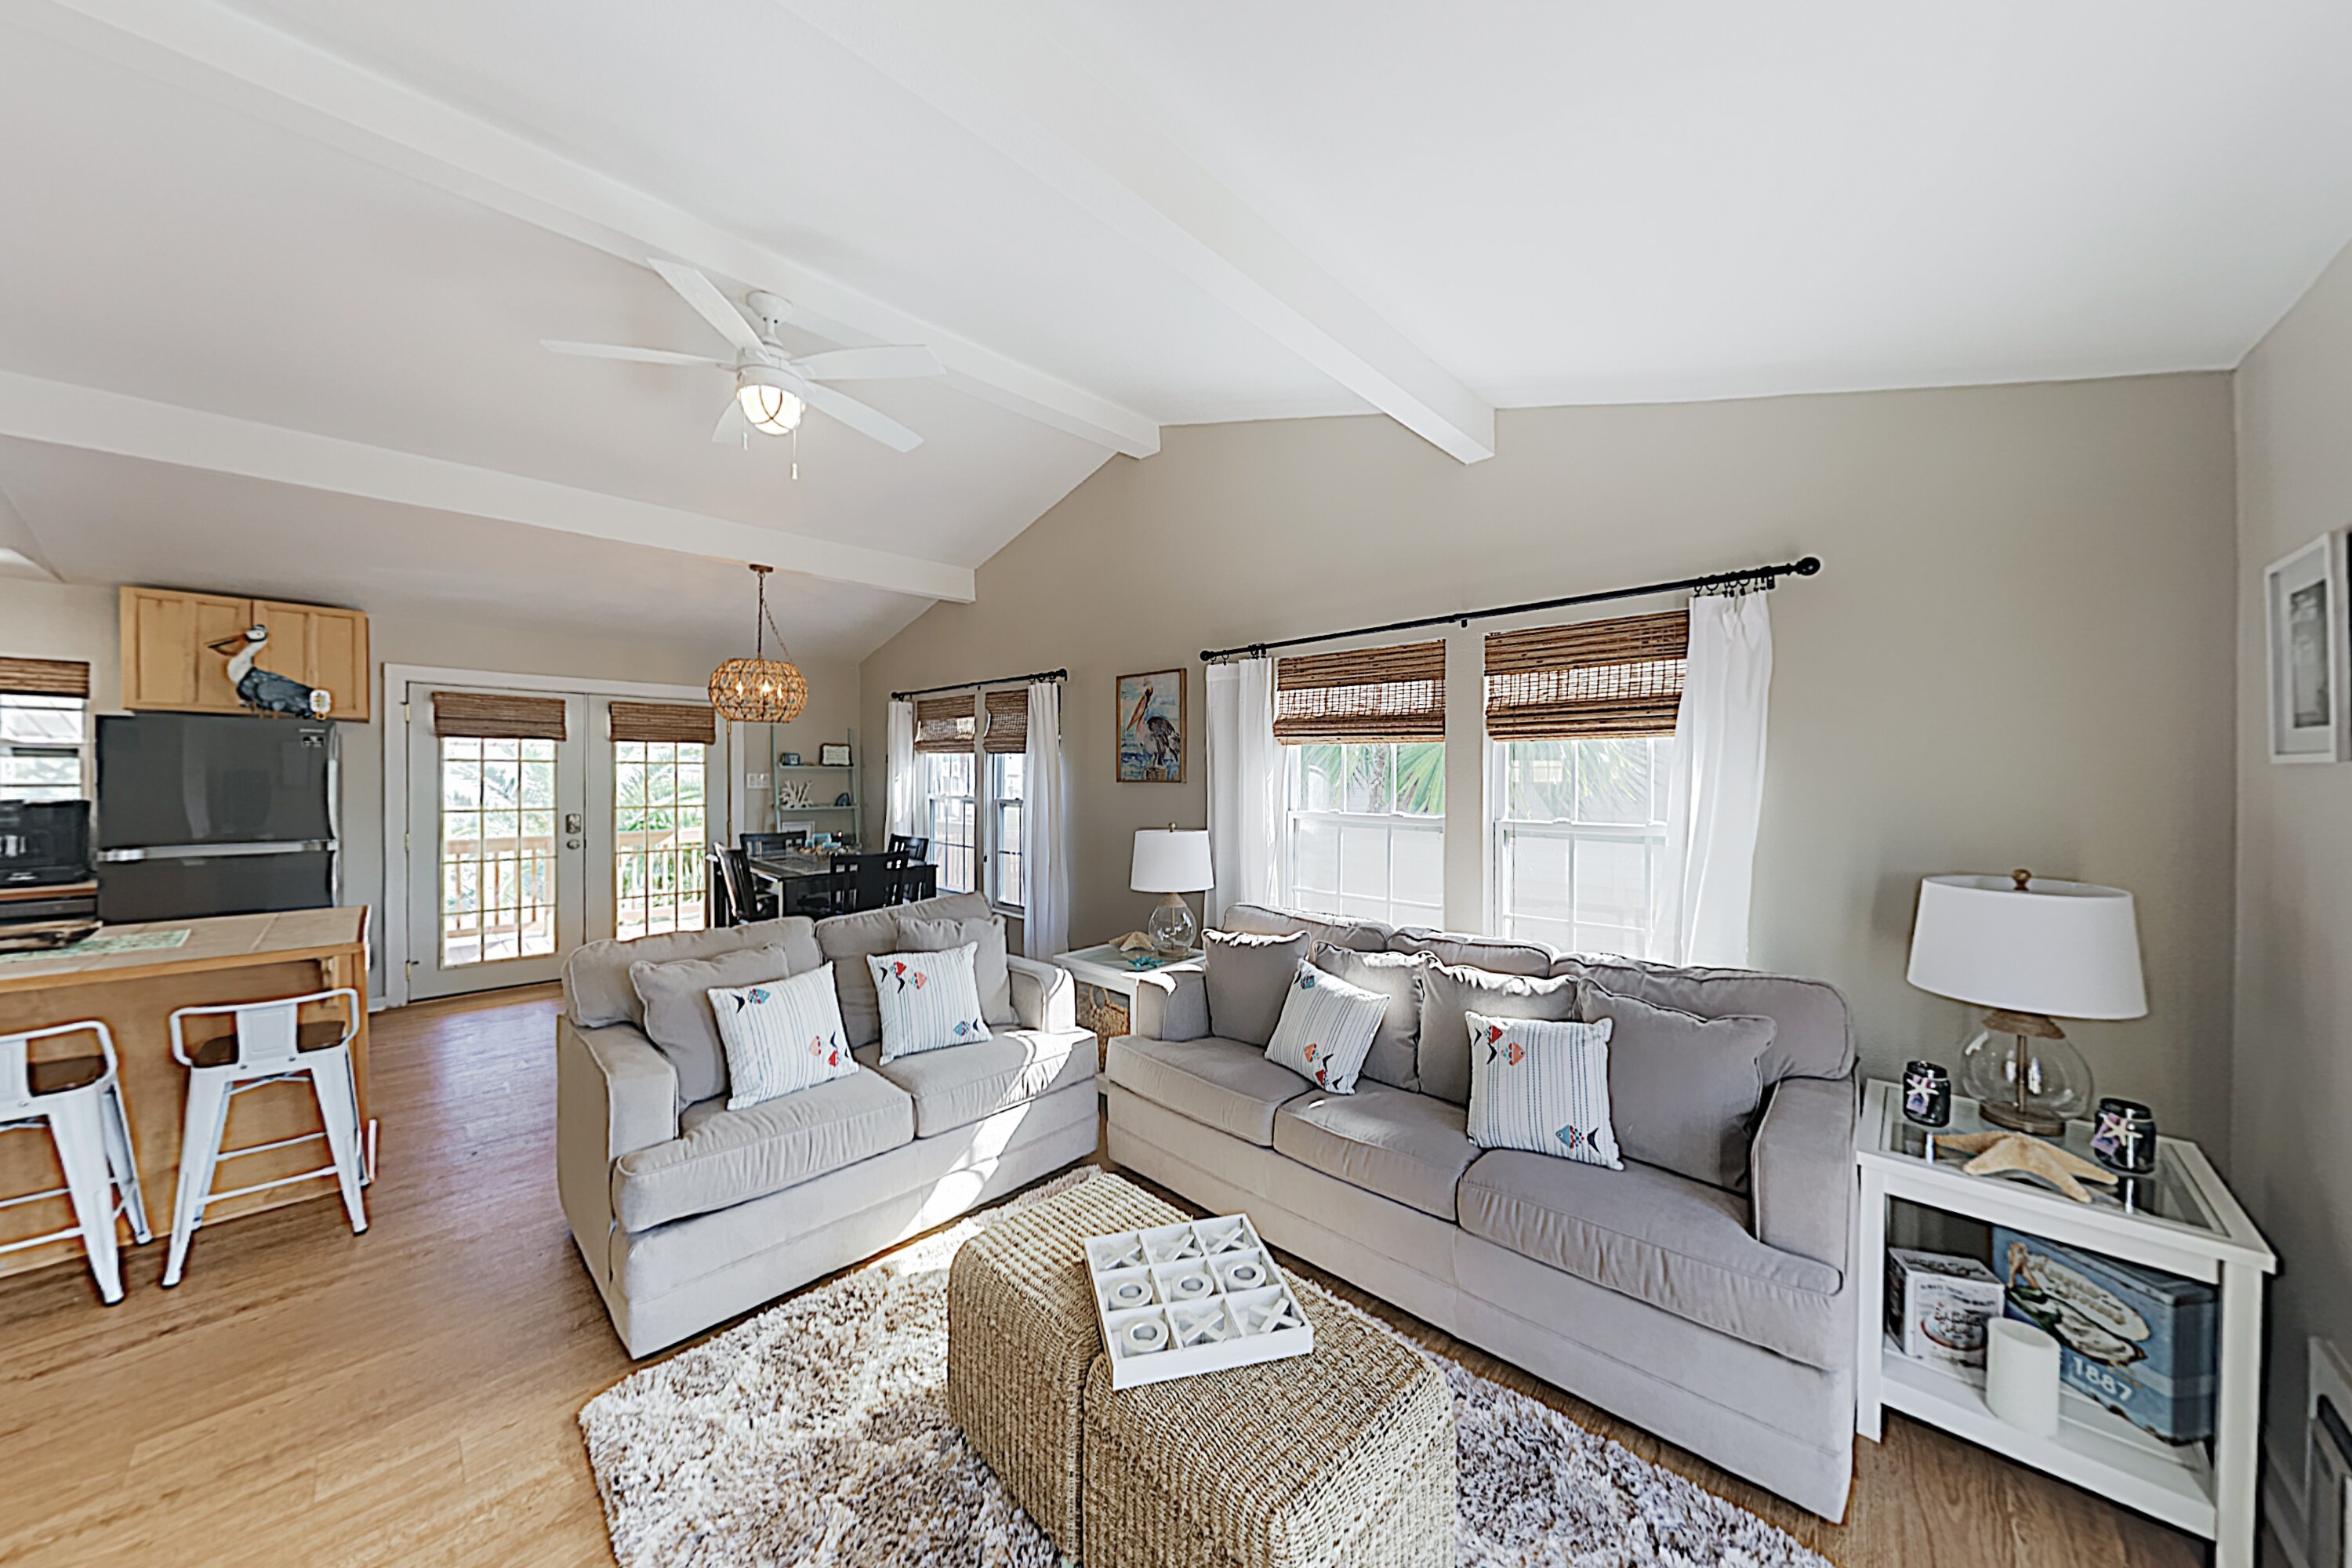 Natural light floods the welcoming living room, which is furnished with a queen-size sleeper sofa.